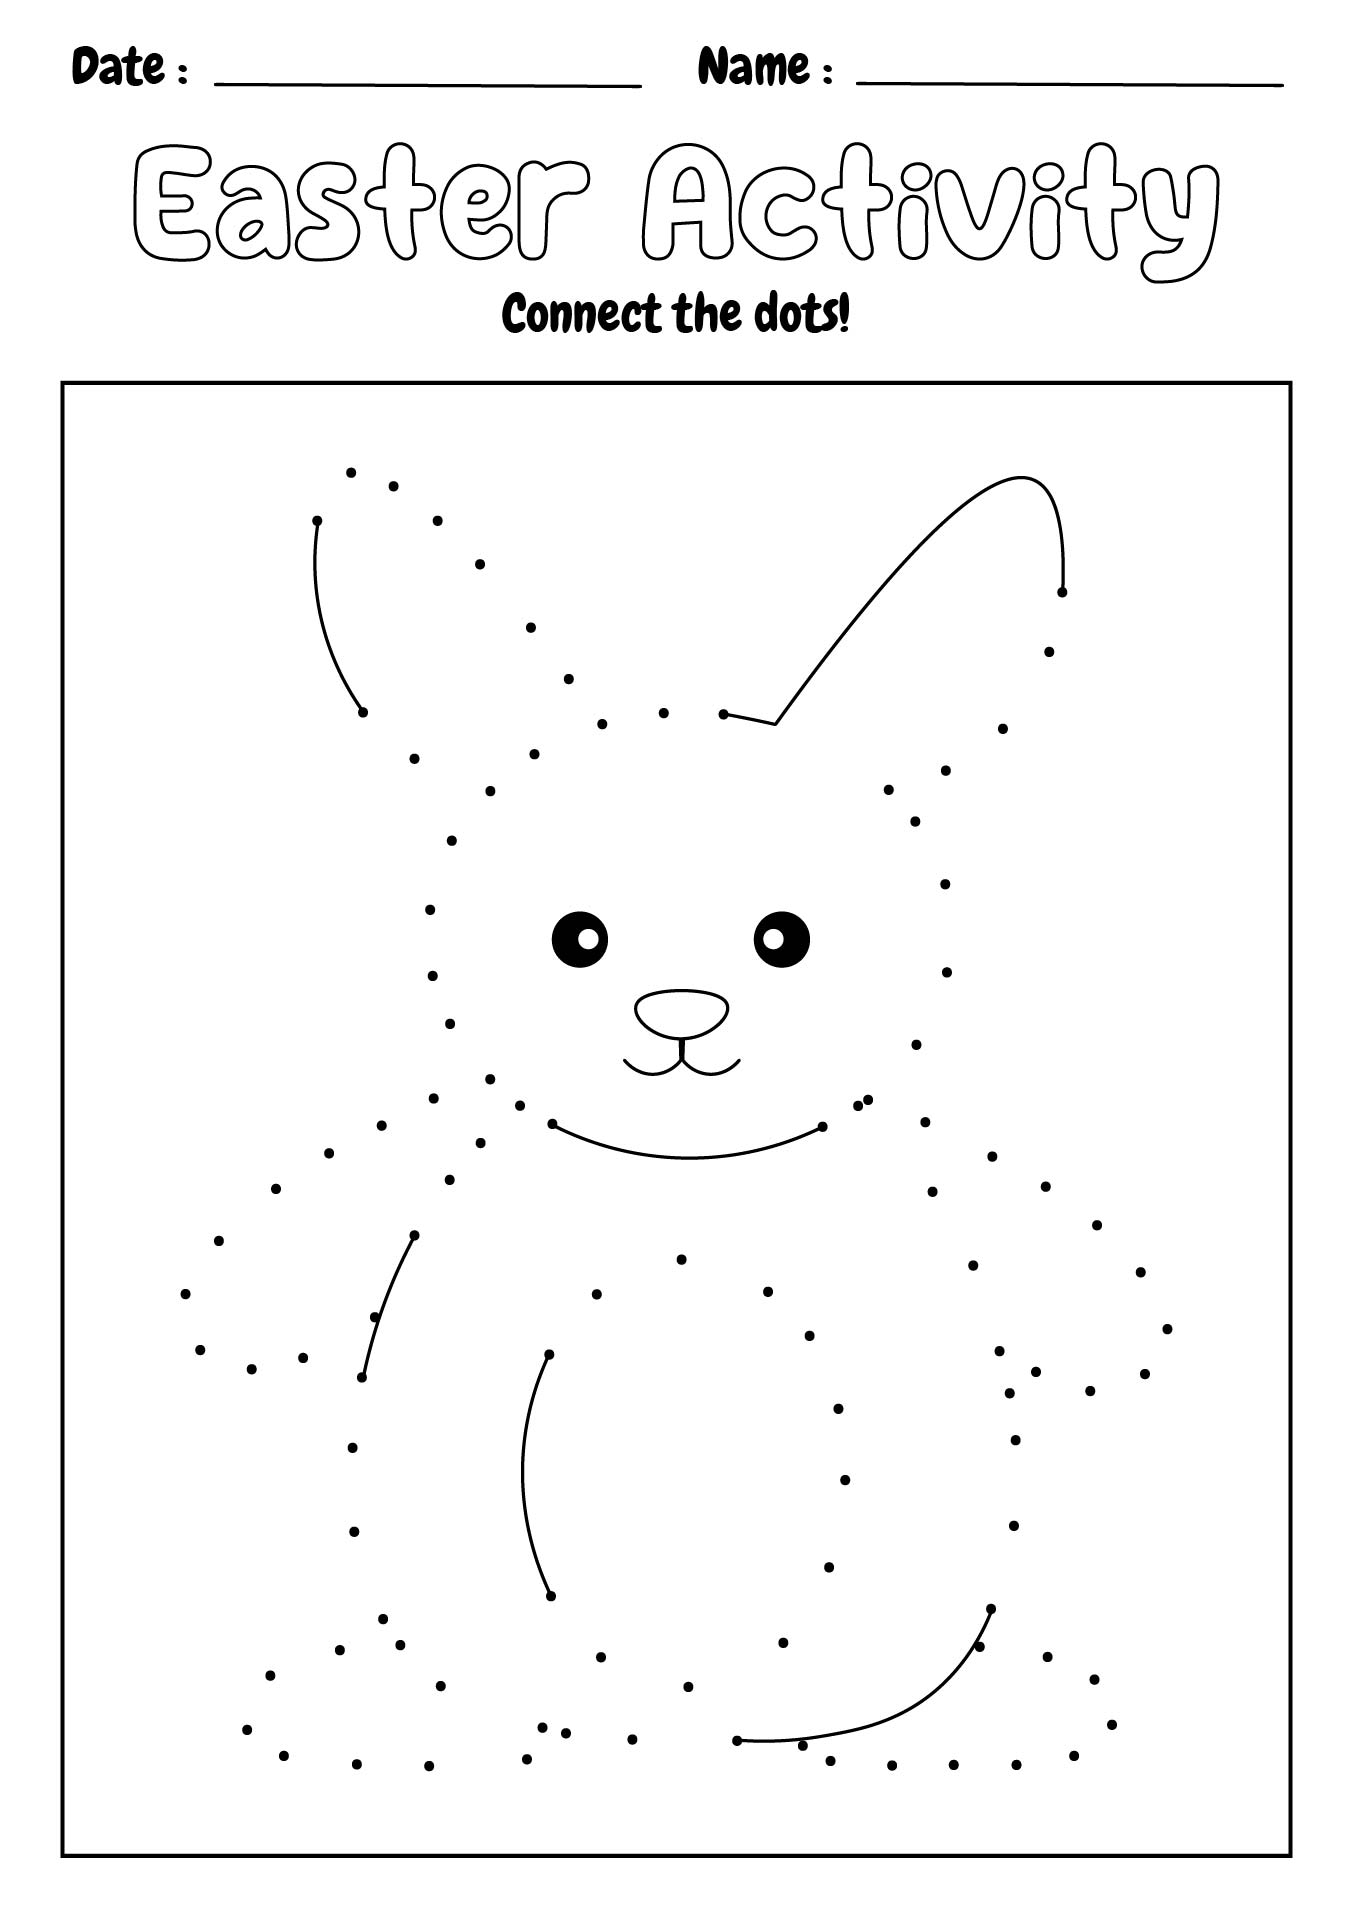 Printable Easter Activities For Kids